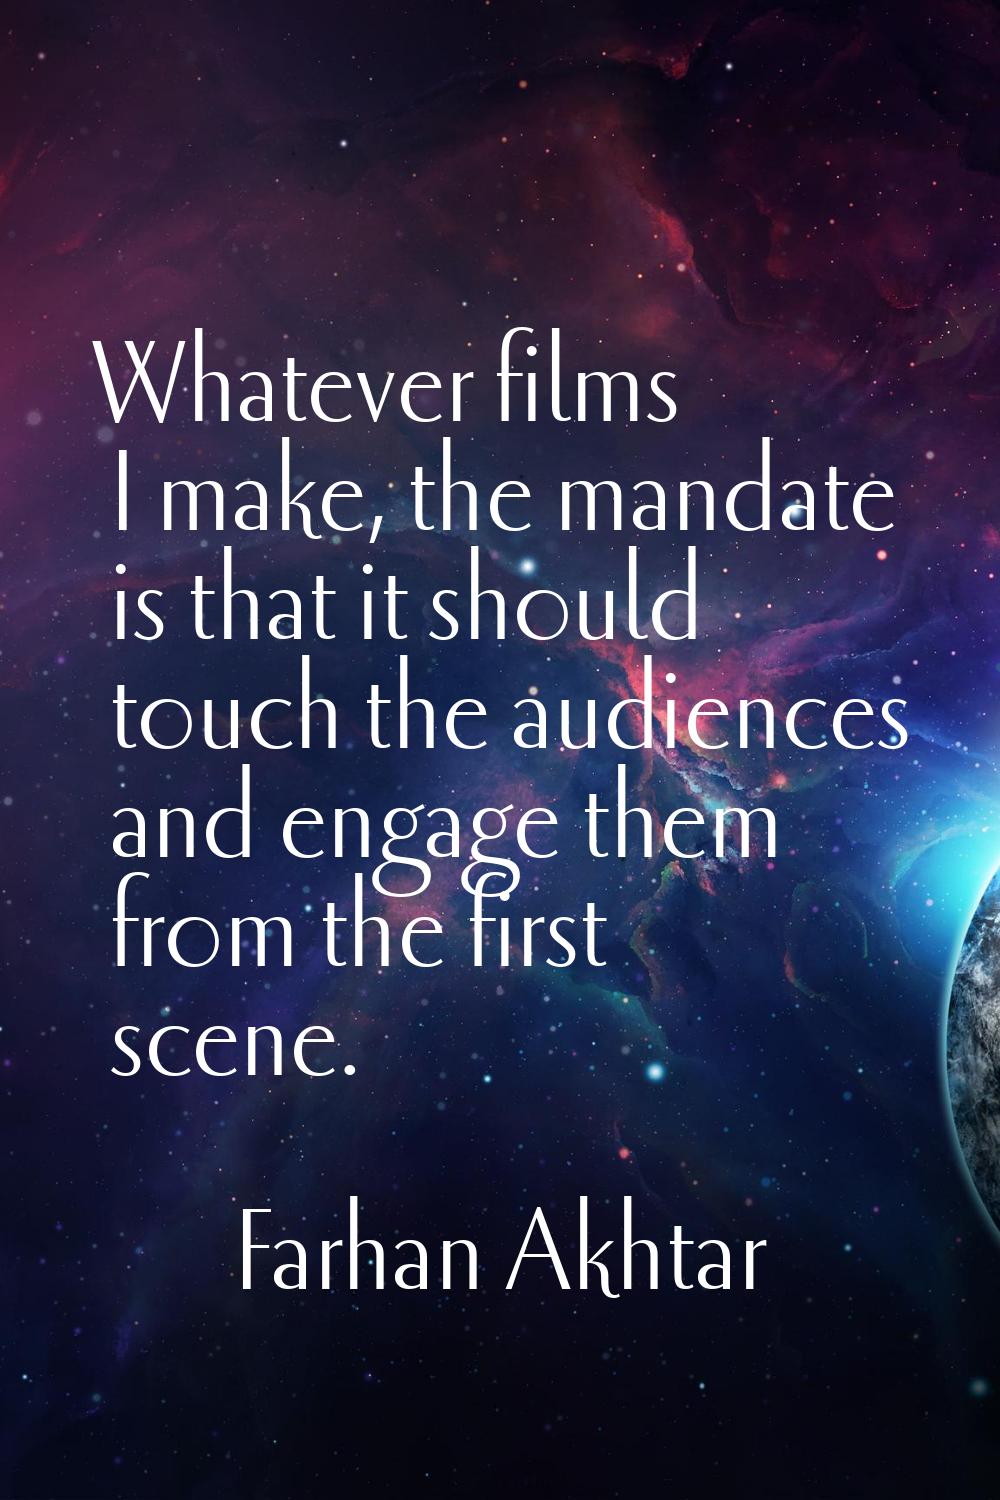 Whatever films I make, the mandate is that it should touch the audiences and engage them from the f